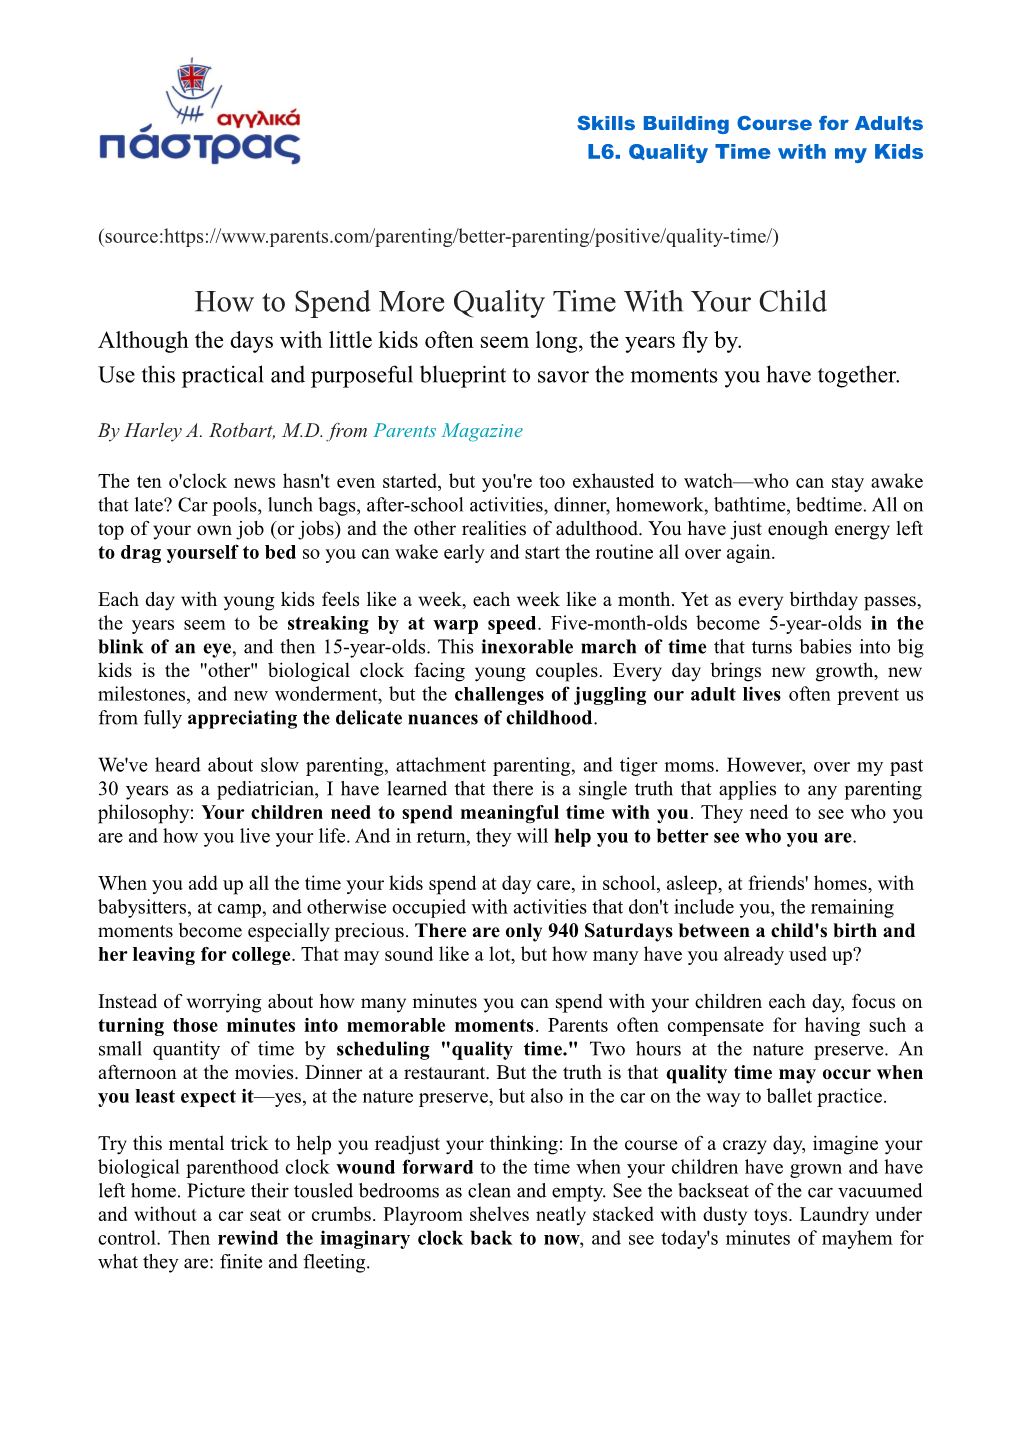 How to Spend More Quality Time with Your Child Although the Days with Little Kids Often Seem Long, the Years Fly By